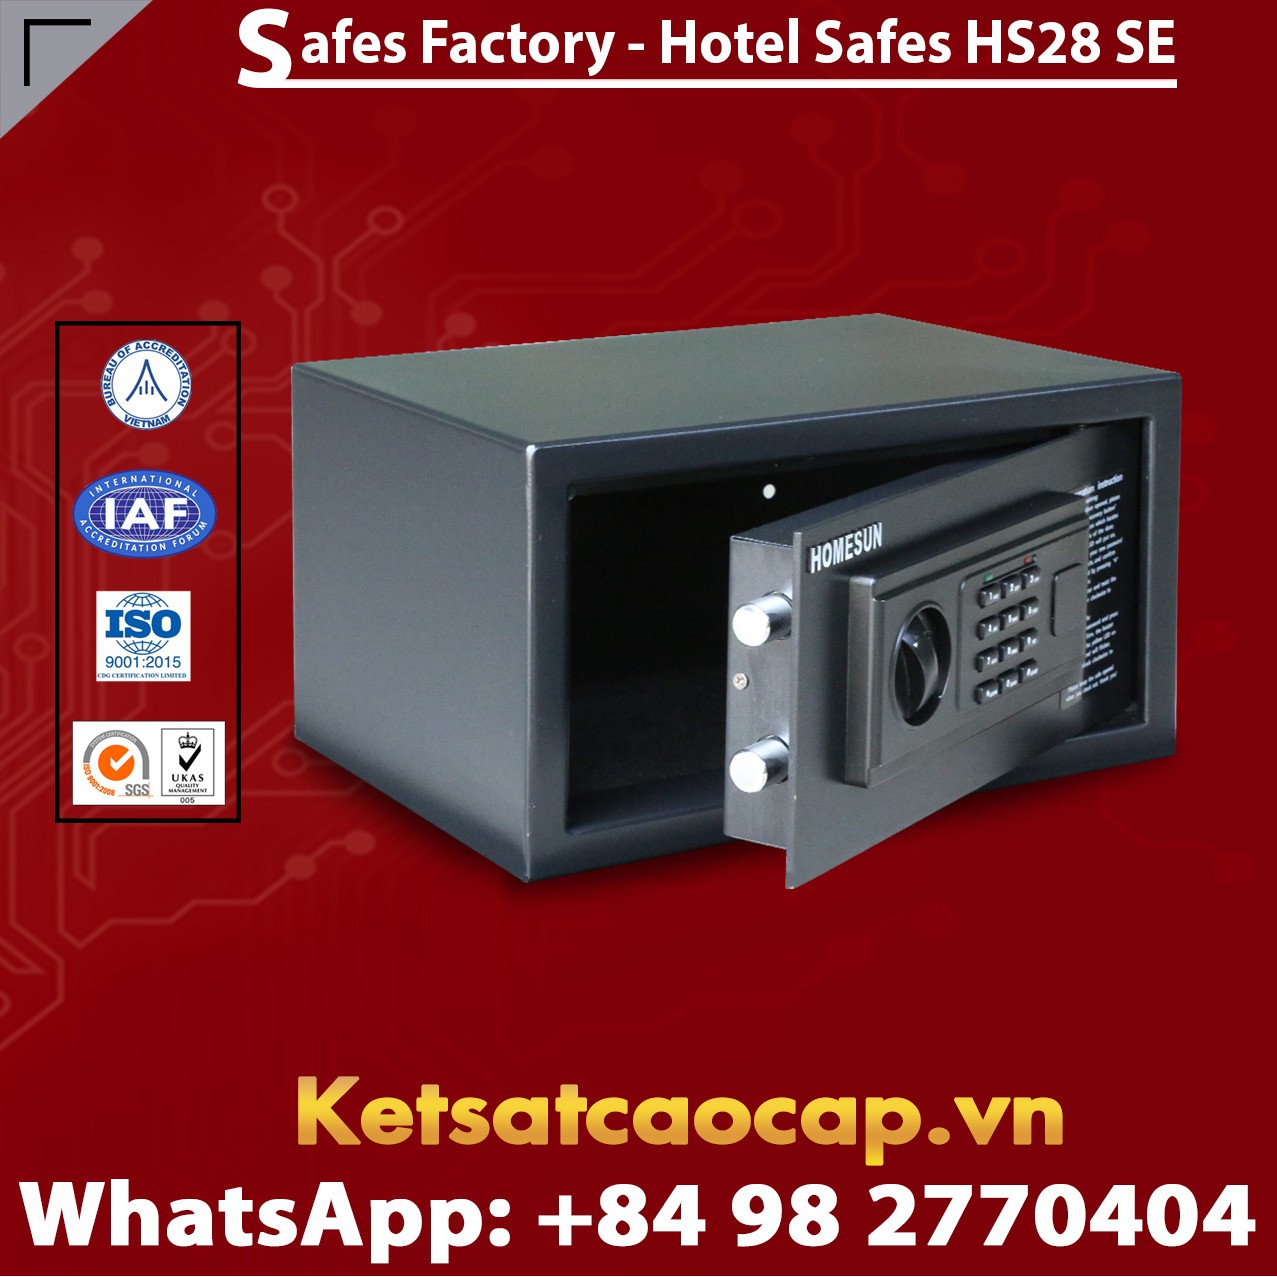 Best Sellers In Hotel Safes Suppliers and Exporters HOMESUN